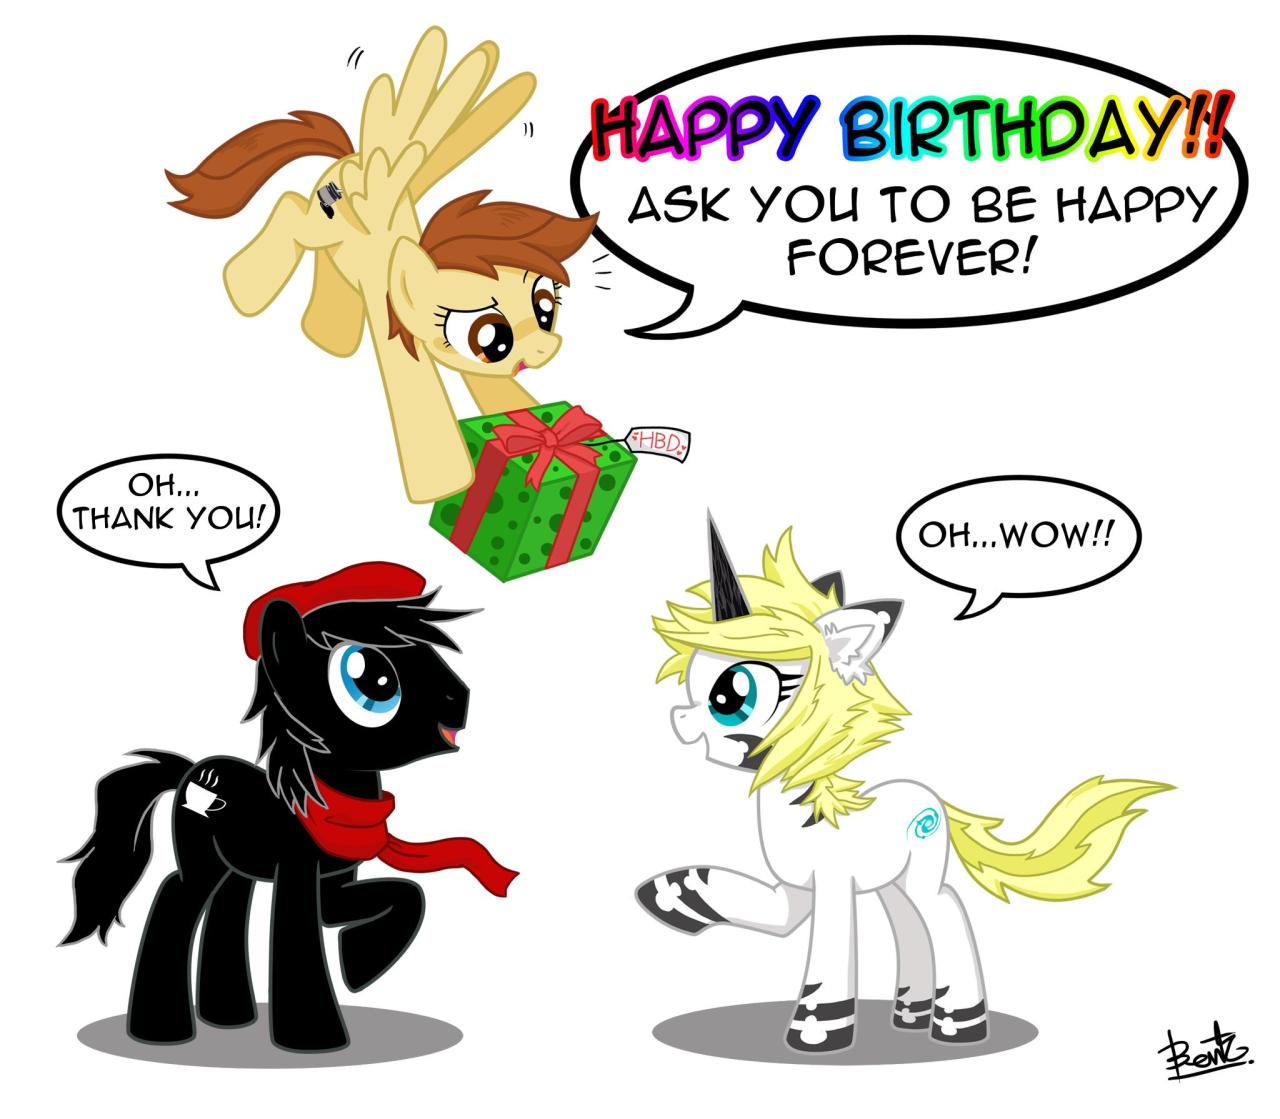 Part2 Digital art gift for friends! Thanks agian! It&rsquo;s really great birthday